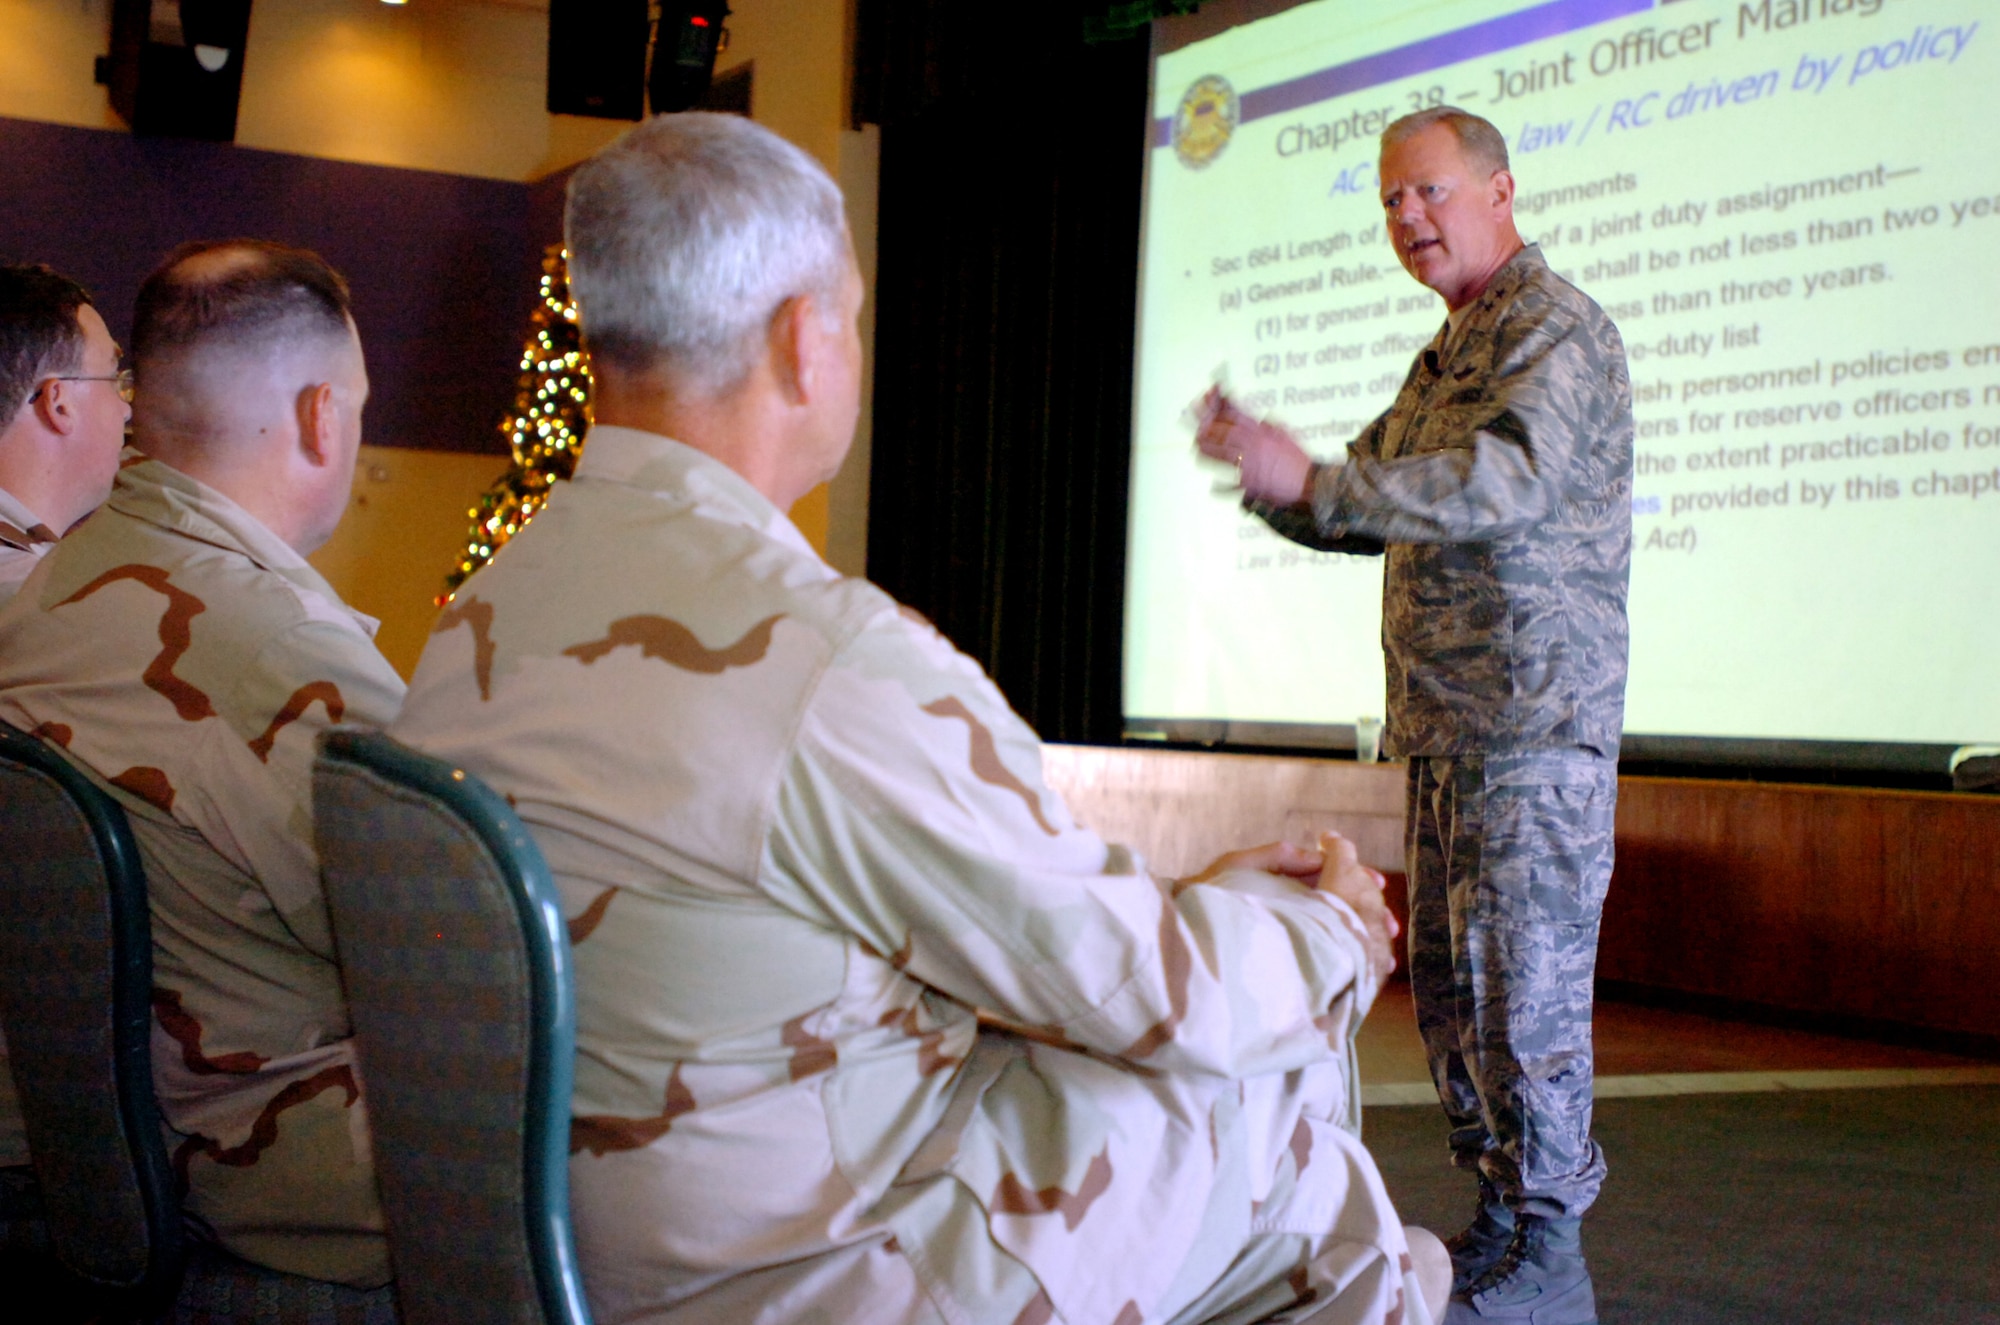 Air Force Maj. Gen. Jim Graves, the assistant to the Chairman of the Joint Chiefs of Staff for Reserve Affairs, gives a slideshow presentation to National Guard and Reserve members at U.S. Naval Station Guantanamo Bay, Dec. 10. Graves spoke on the importance of joint service experience within the military as well as joint service rank advancement aspects specific to reserve component troops. (Army photo by Pfc. Eric Liesse)
